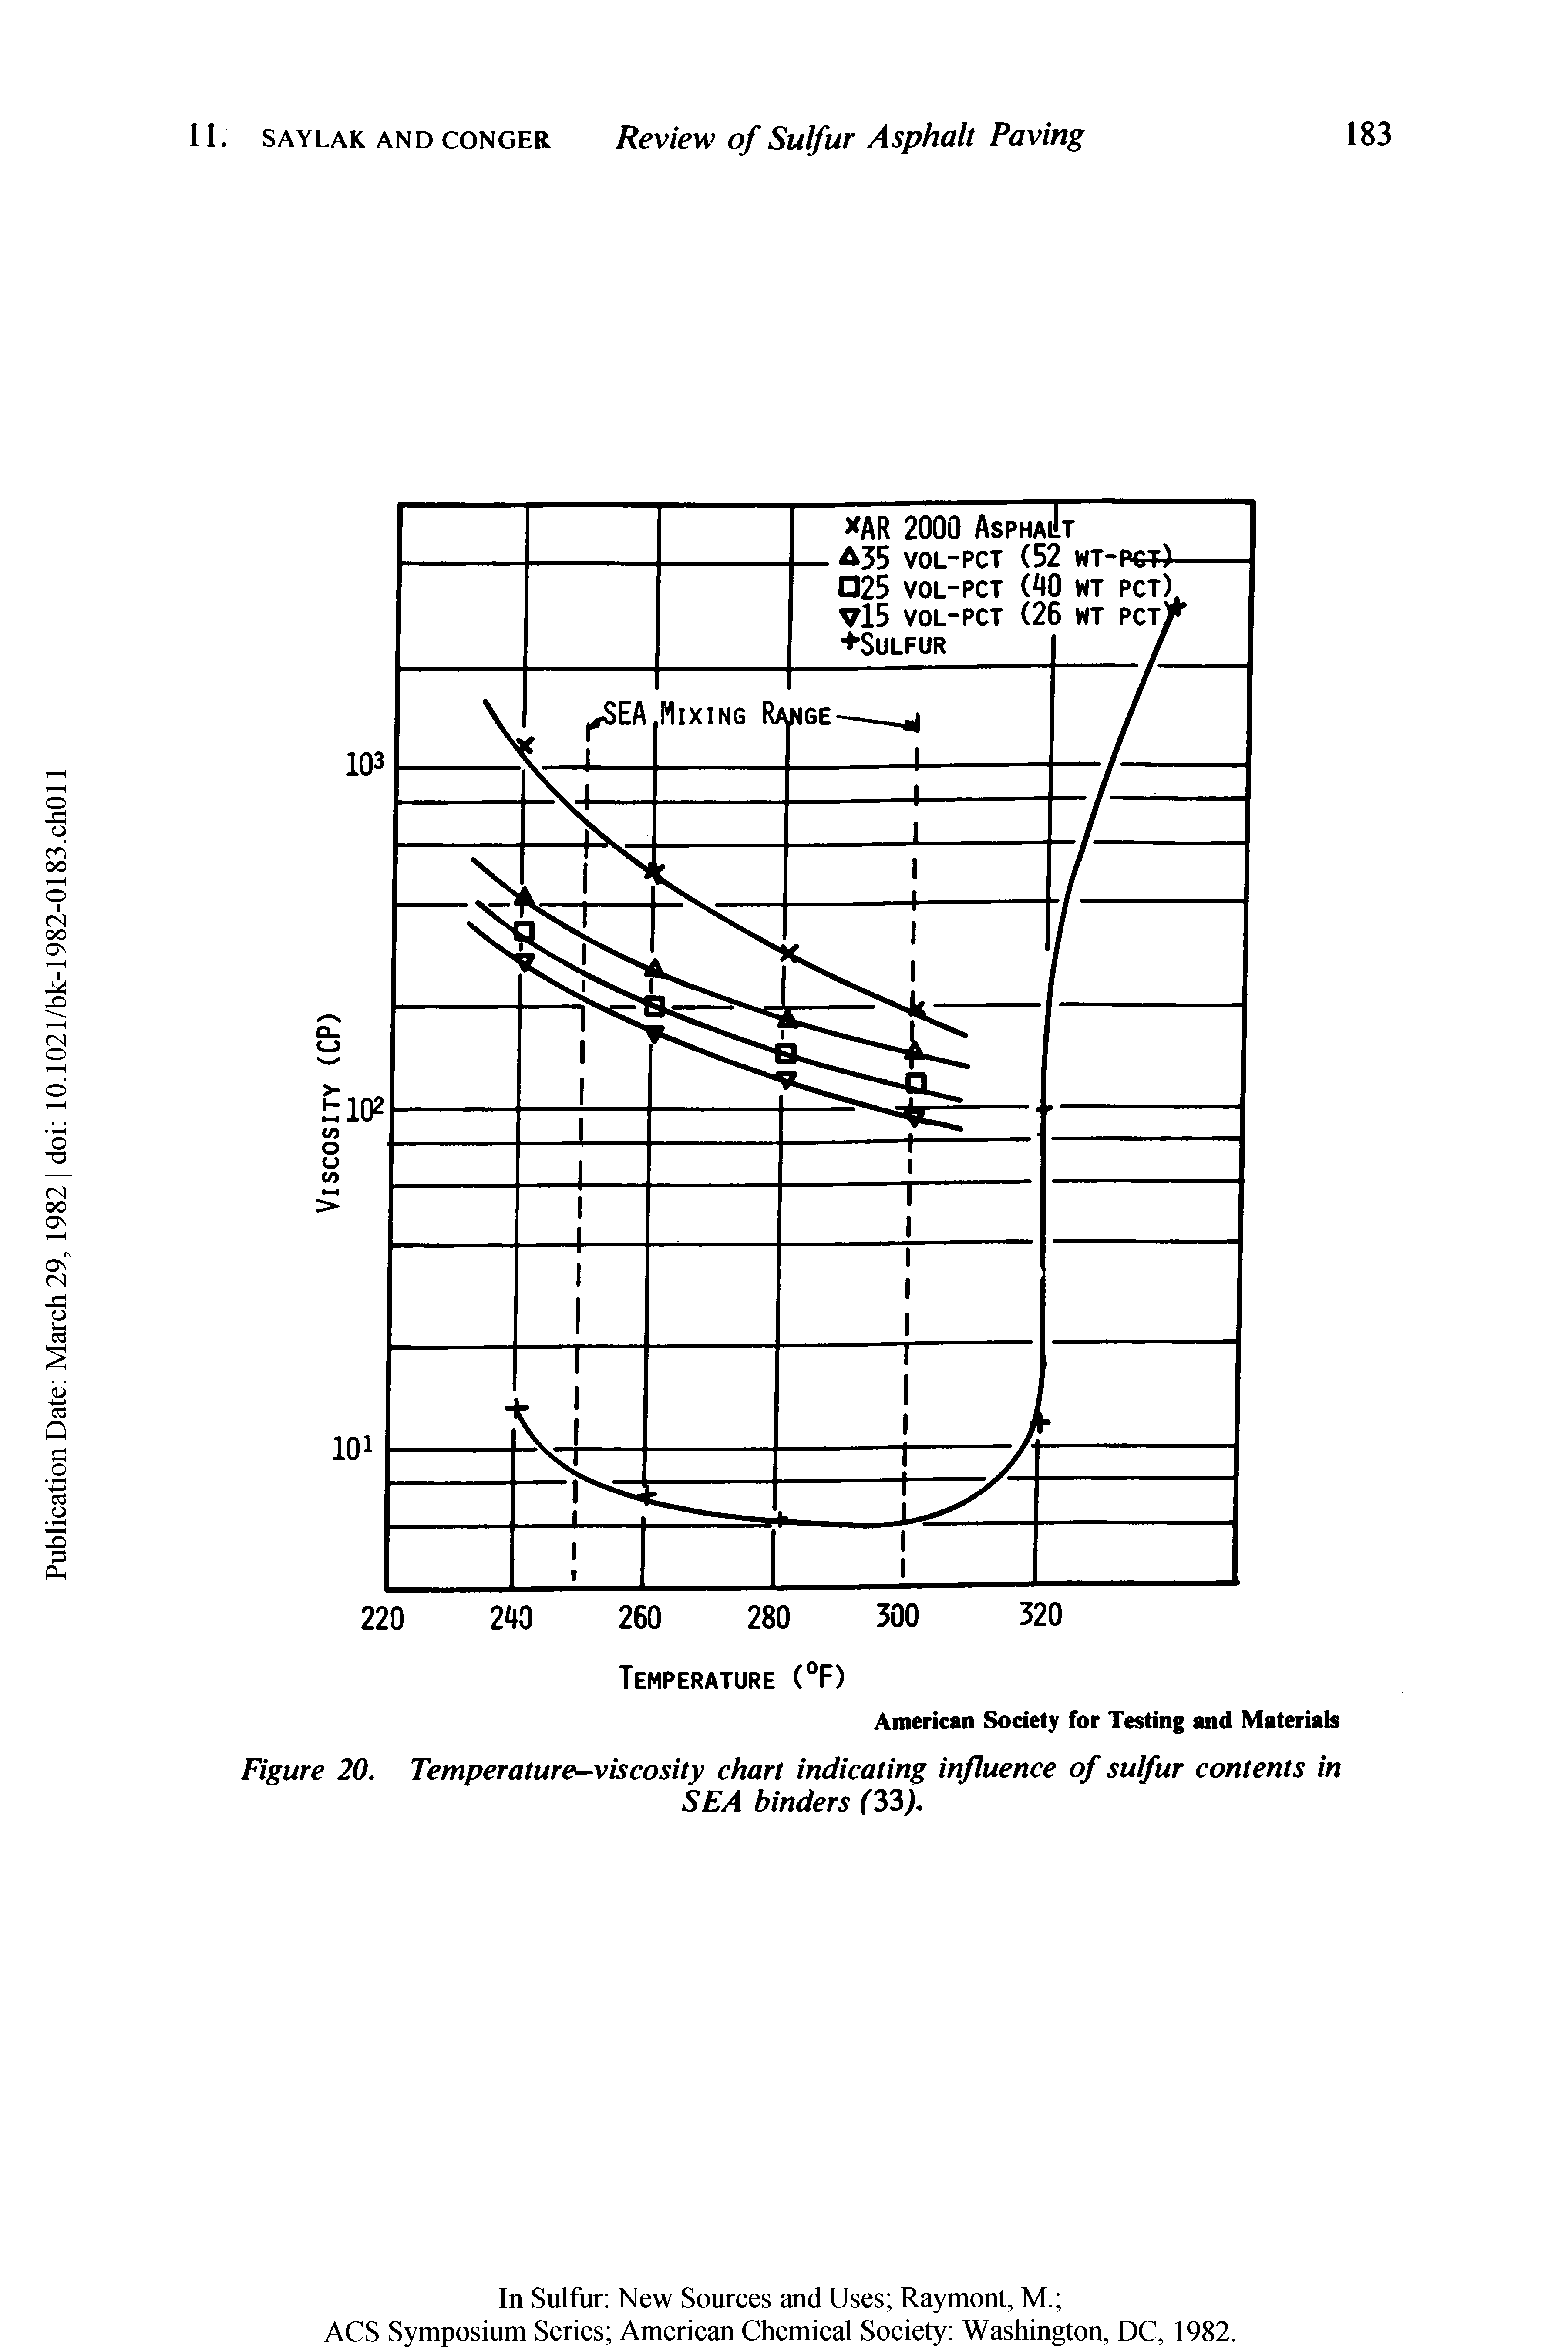 Figure 20. Temperature-viscosity chart indicating influence of sulfur contents in...